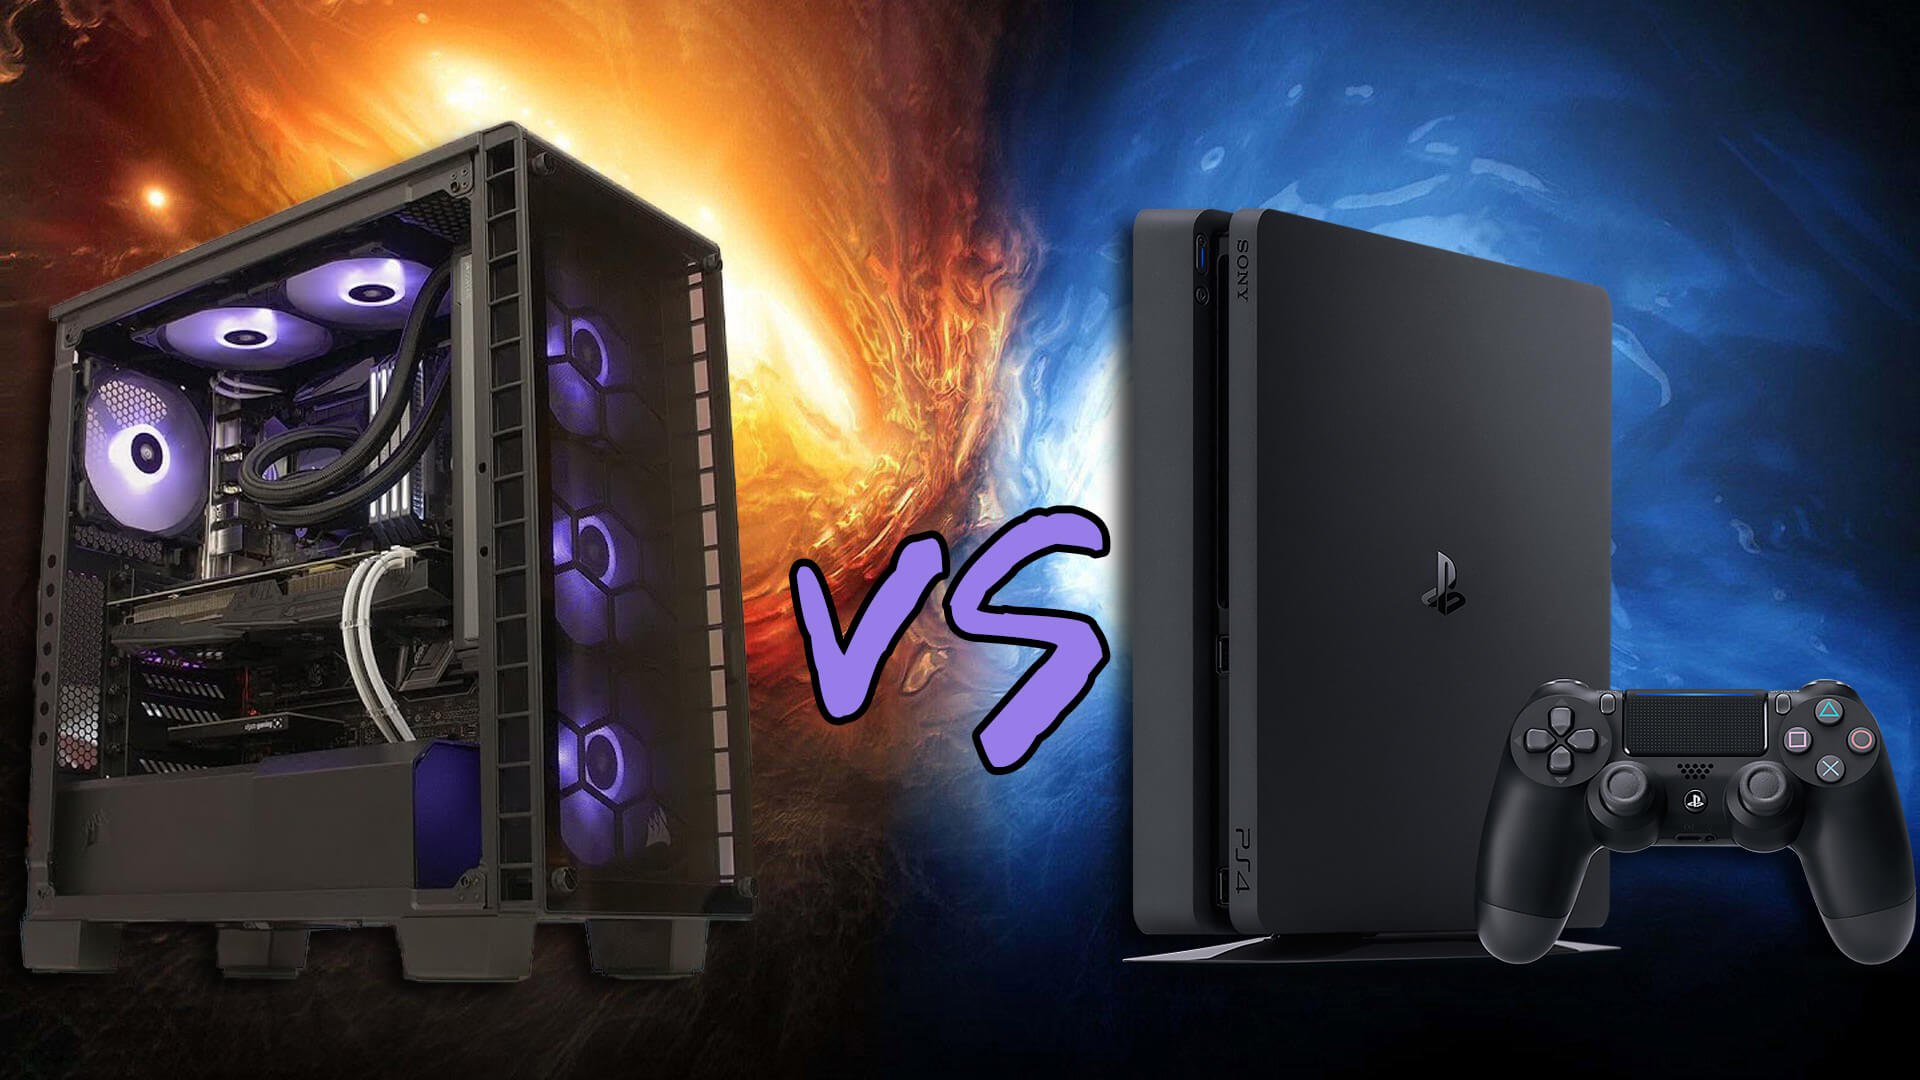 Console Vs PC Gaming: Who Is The Winner?